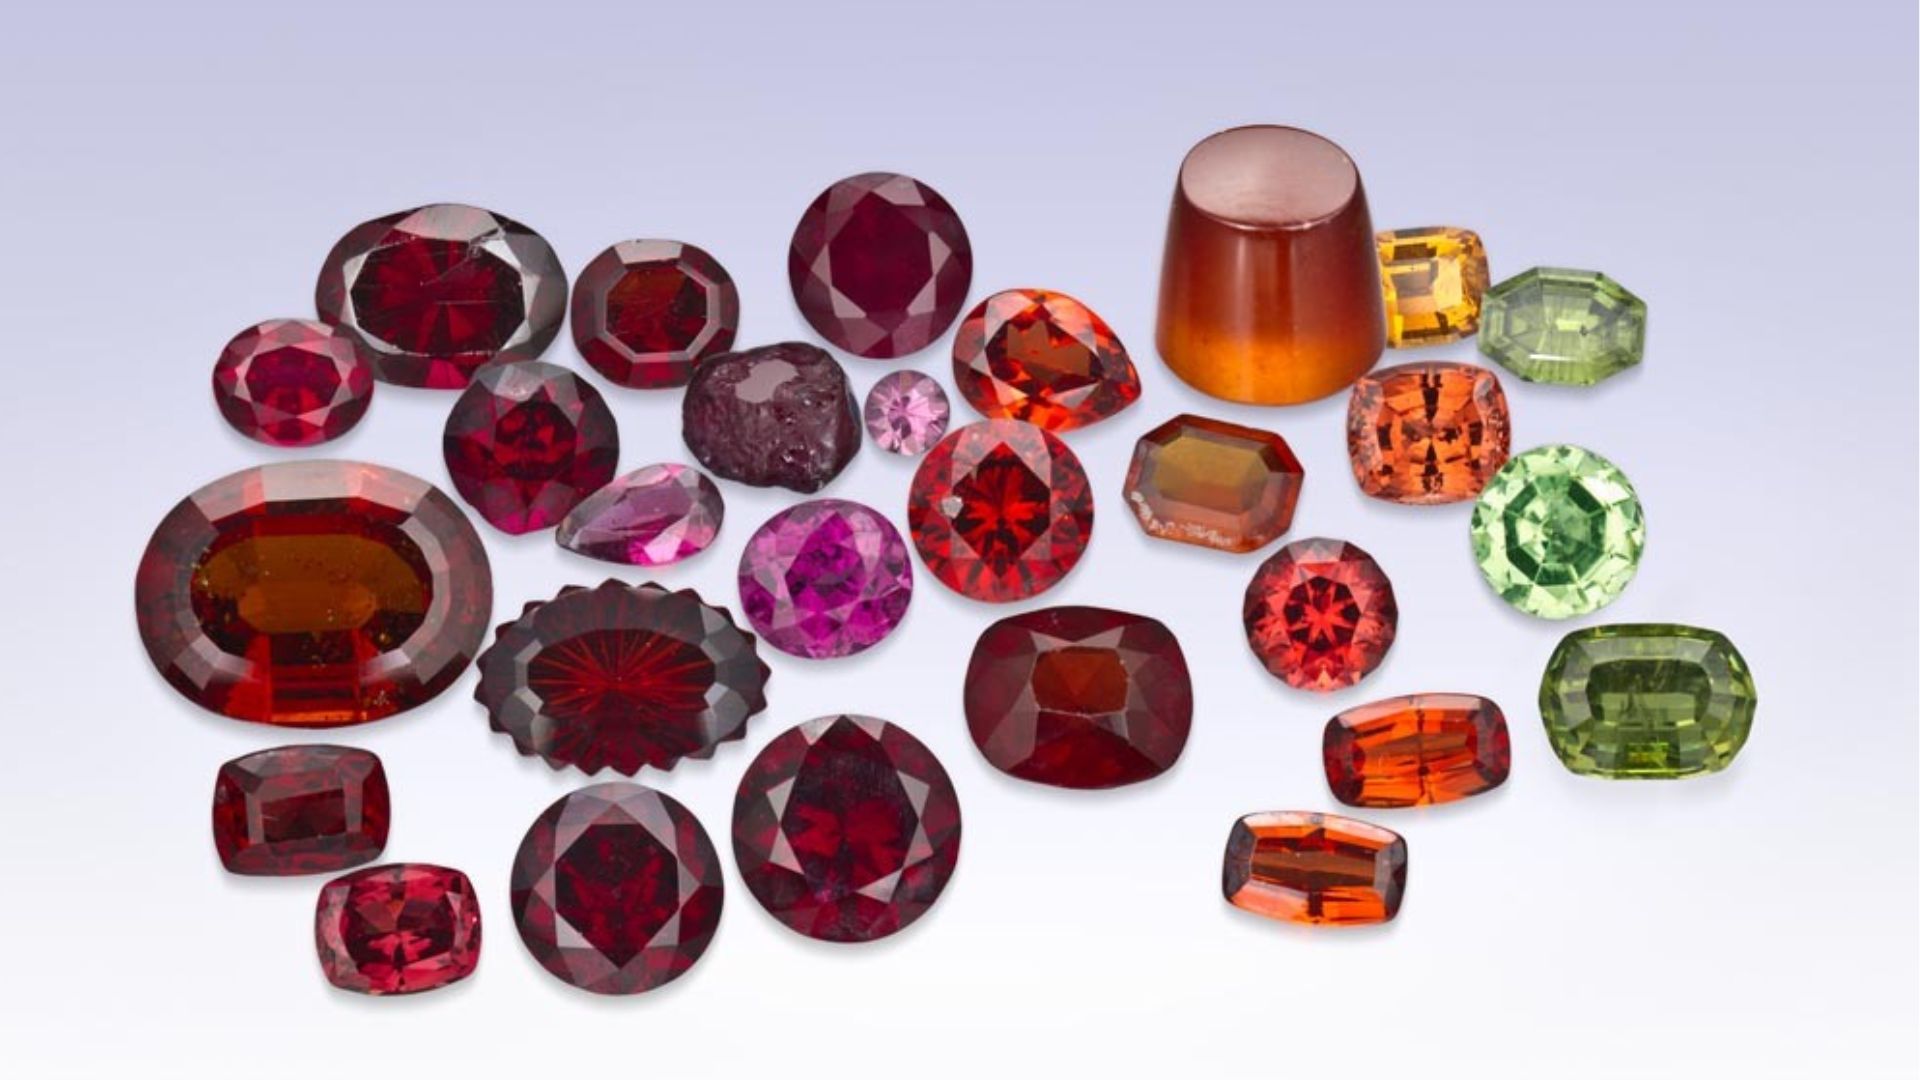 What Birthstone Color Is January - The Significance Of Garnet